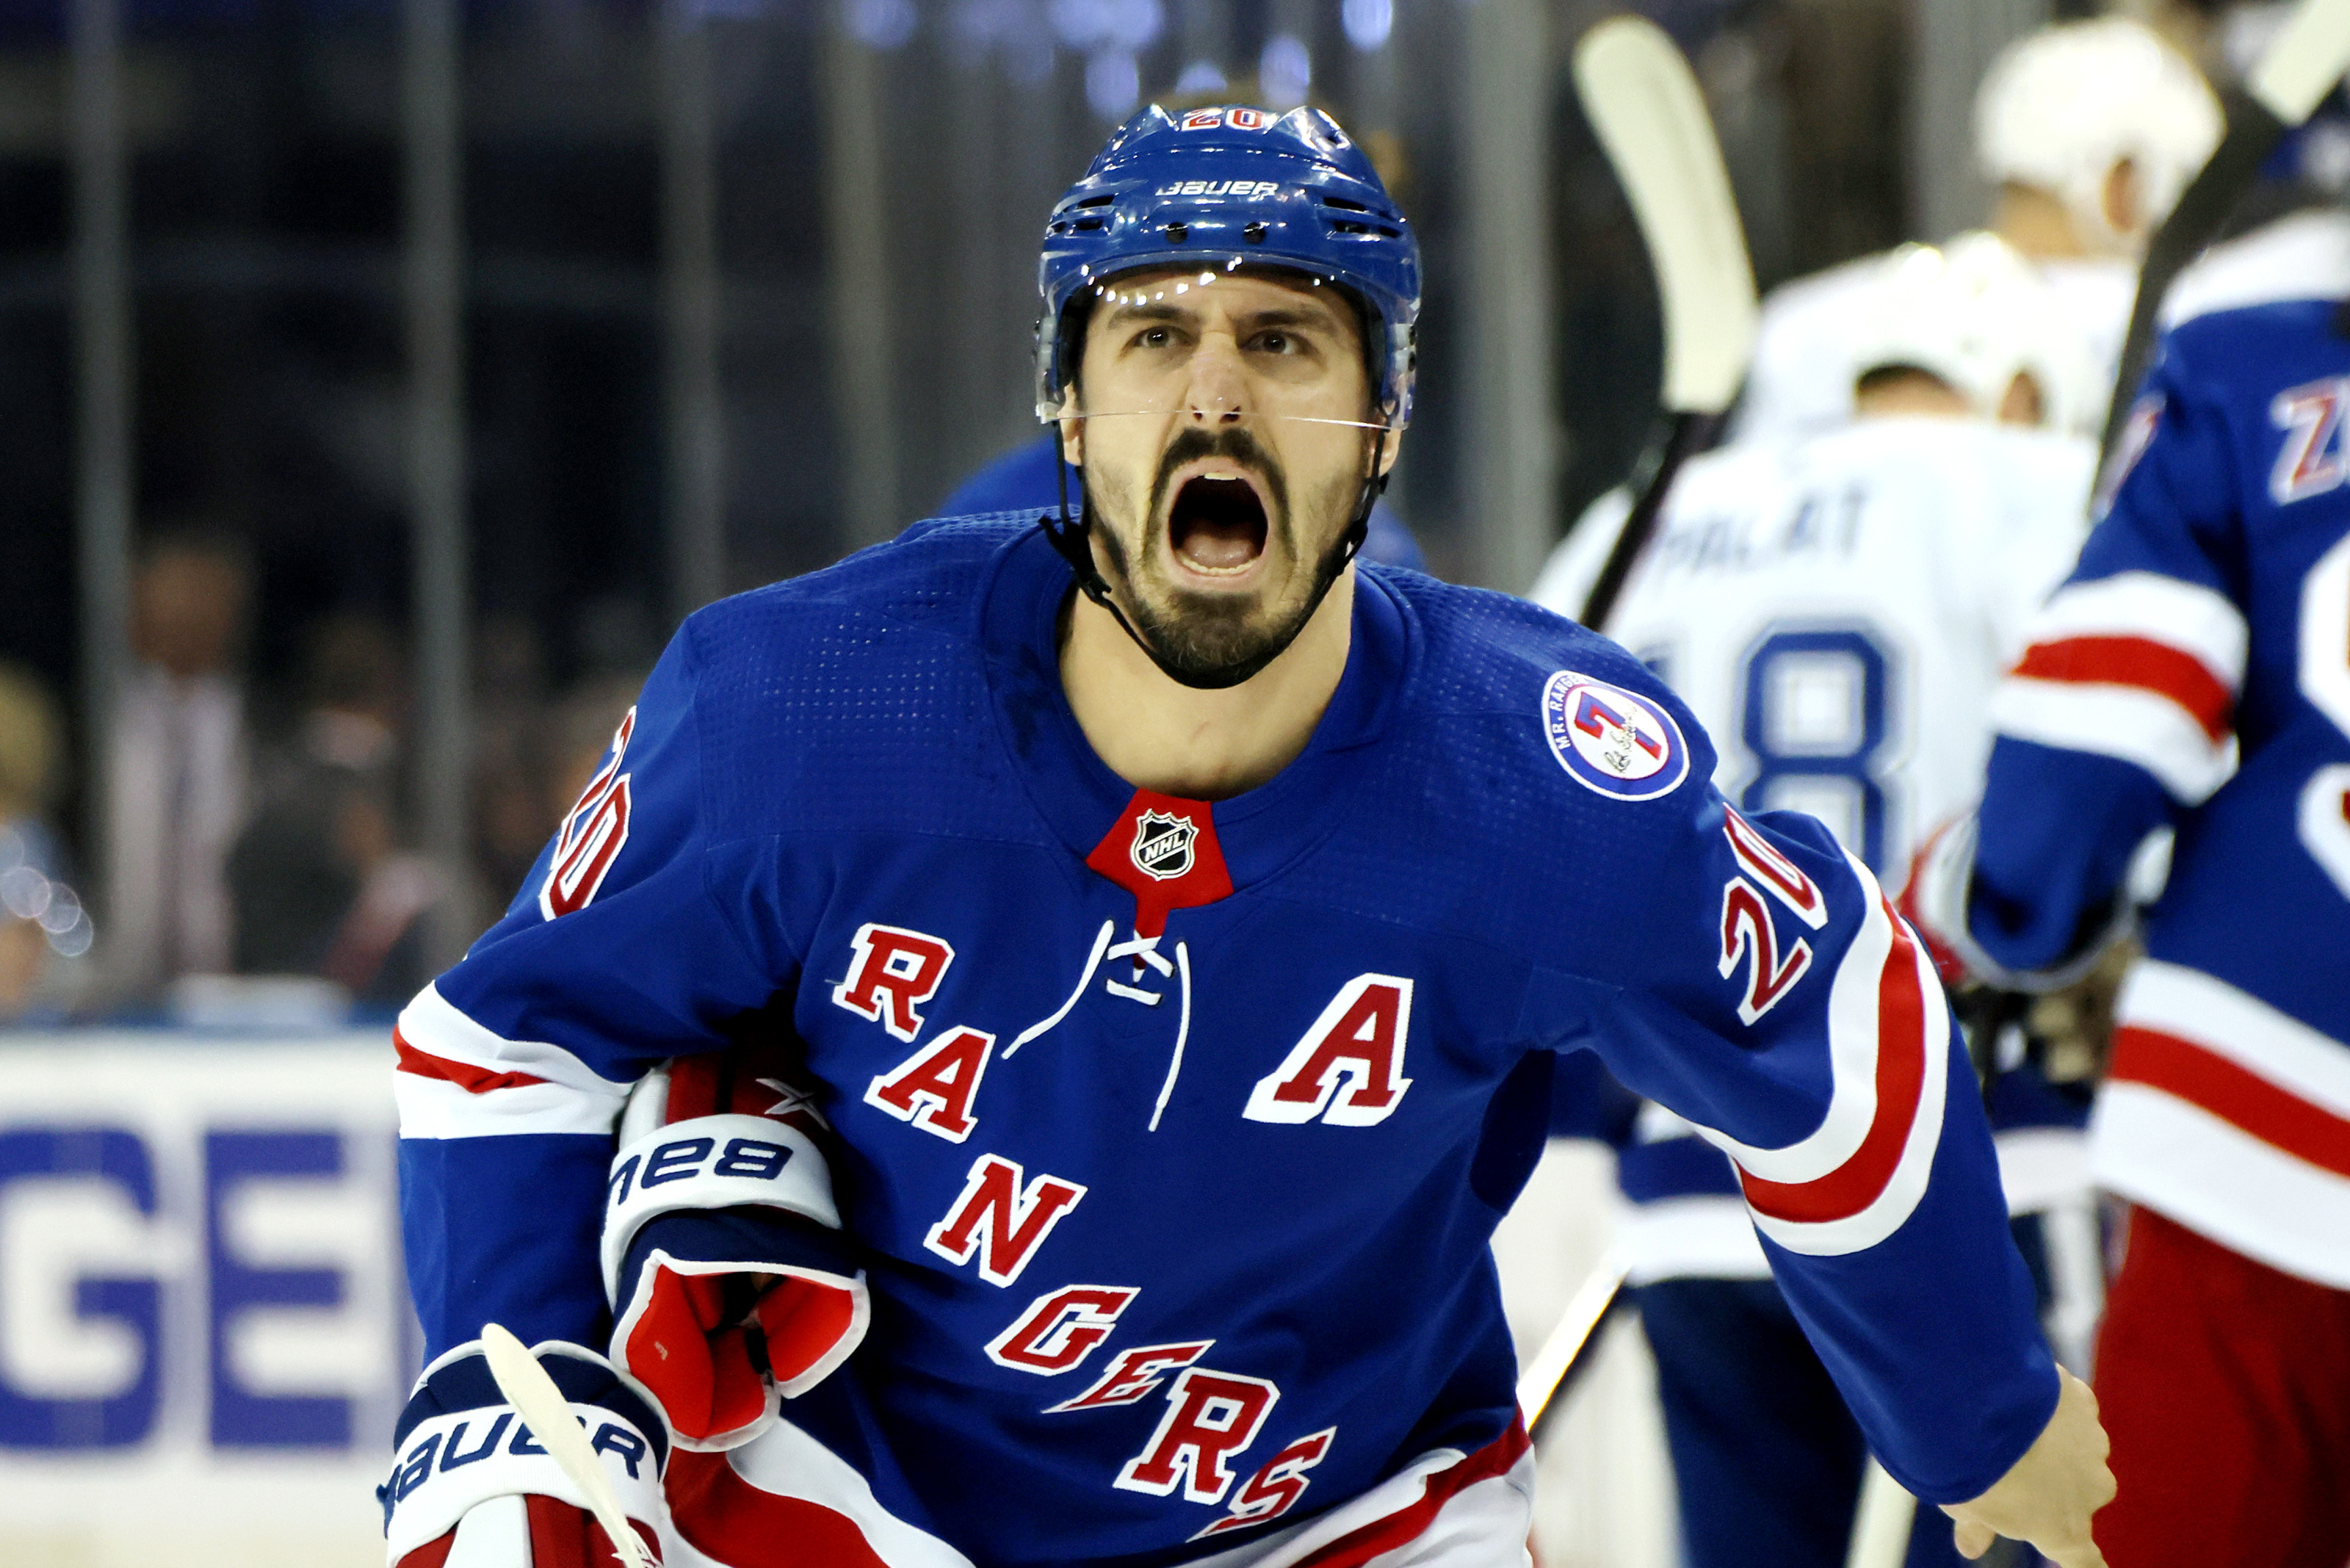 Did you know Chris Kreider was the inspiration for the lavash in